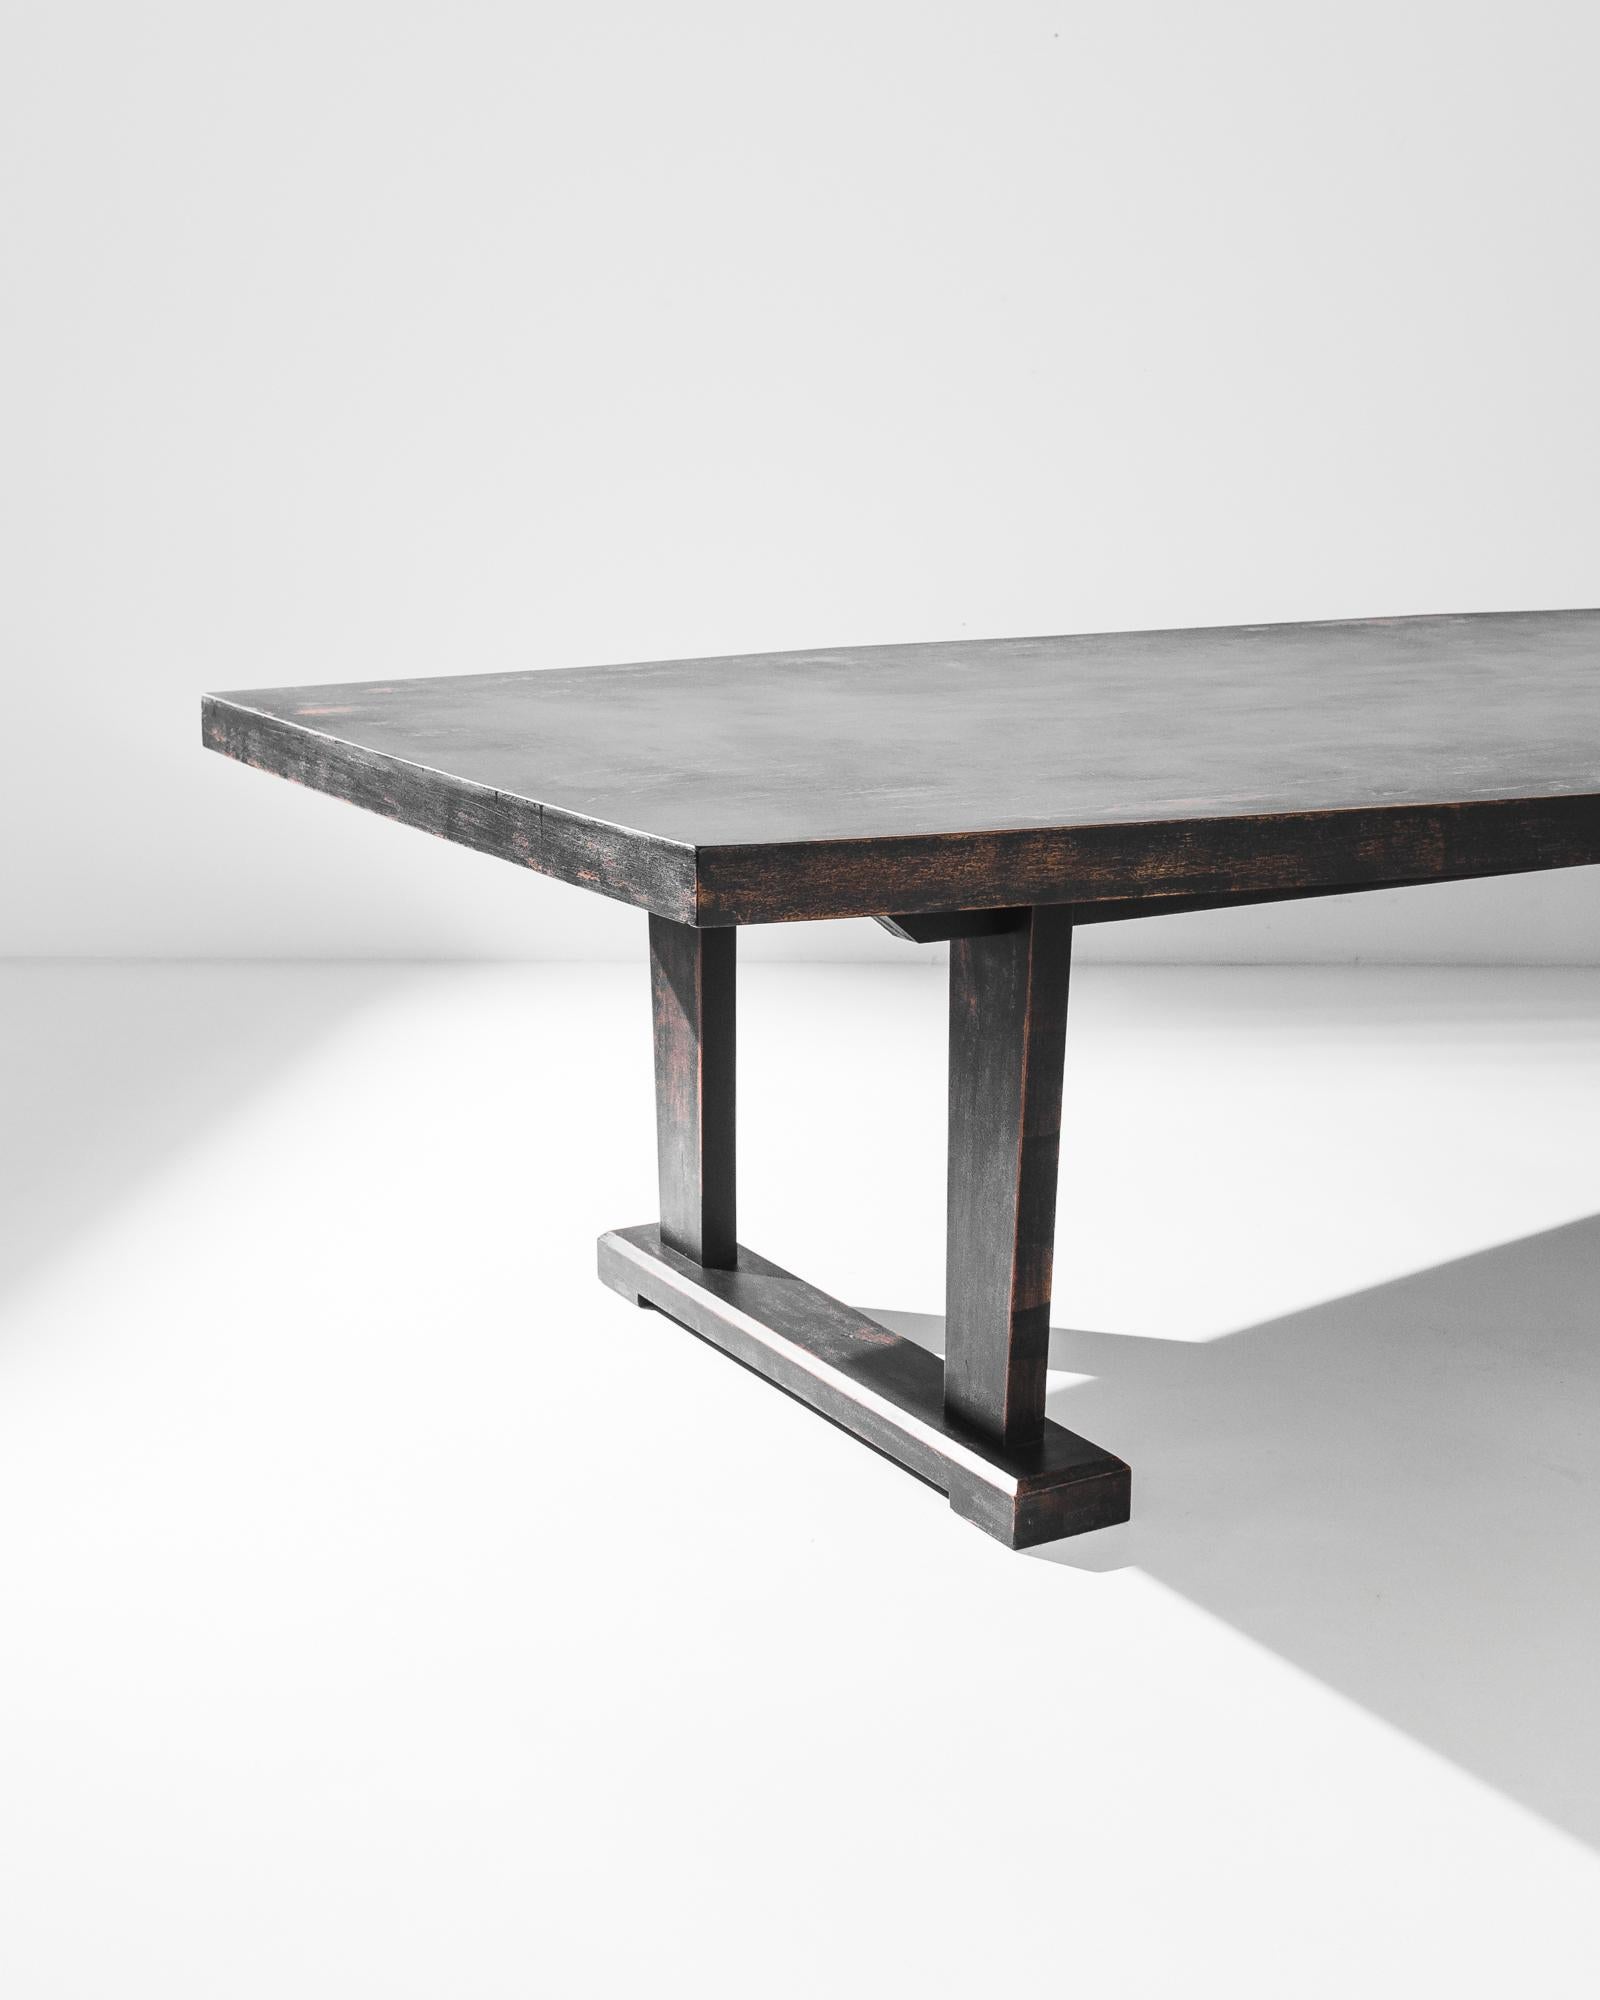 A wooden dining table from 1960s Germany with a stylish Mid-Century Modern aesthetic. A long tabletop sits atop a pair of trestle legs; straight lines and right-angled corners give a clean inflection to the sturdy silhouette. The black-painted